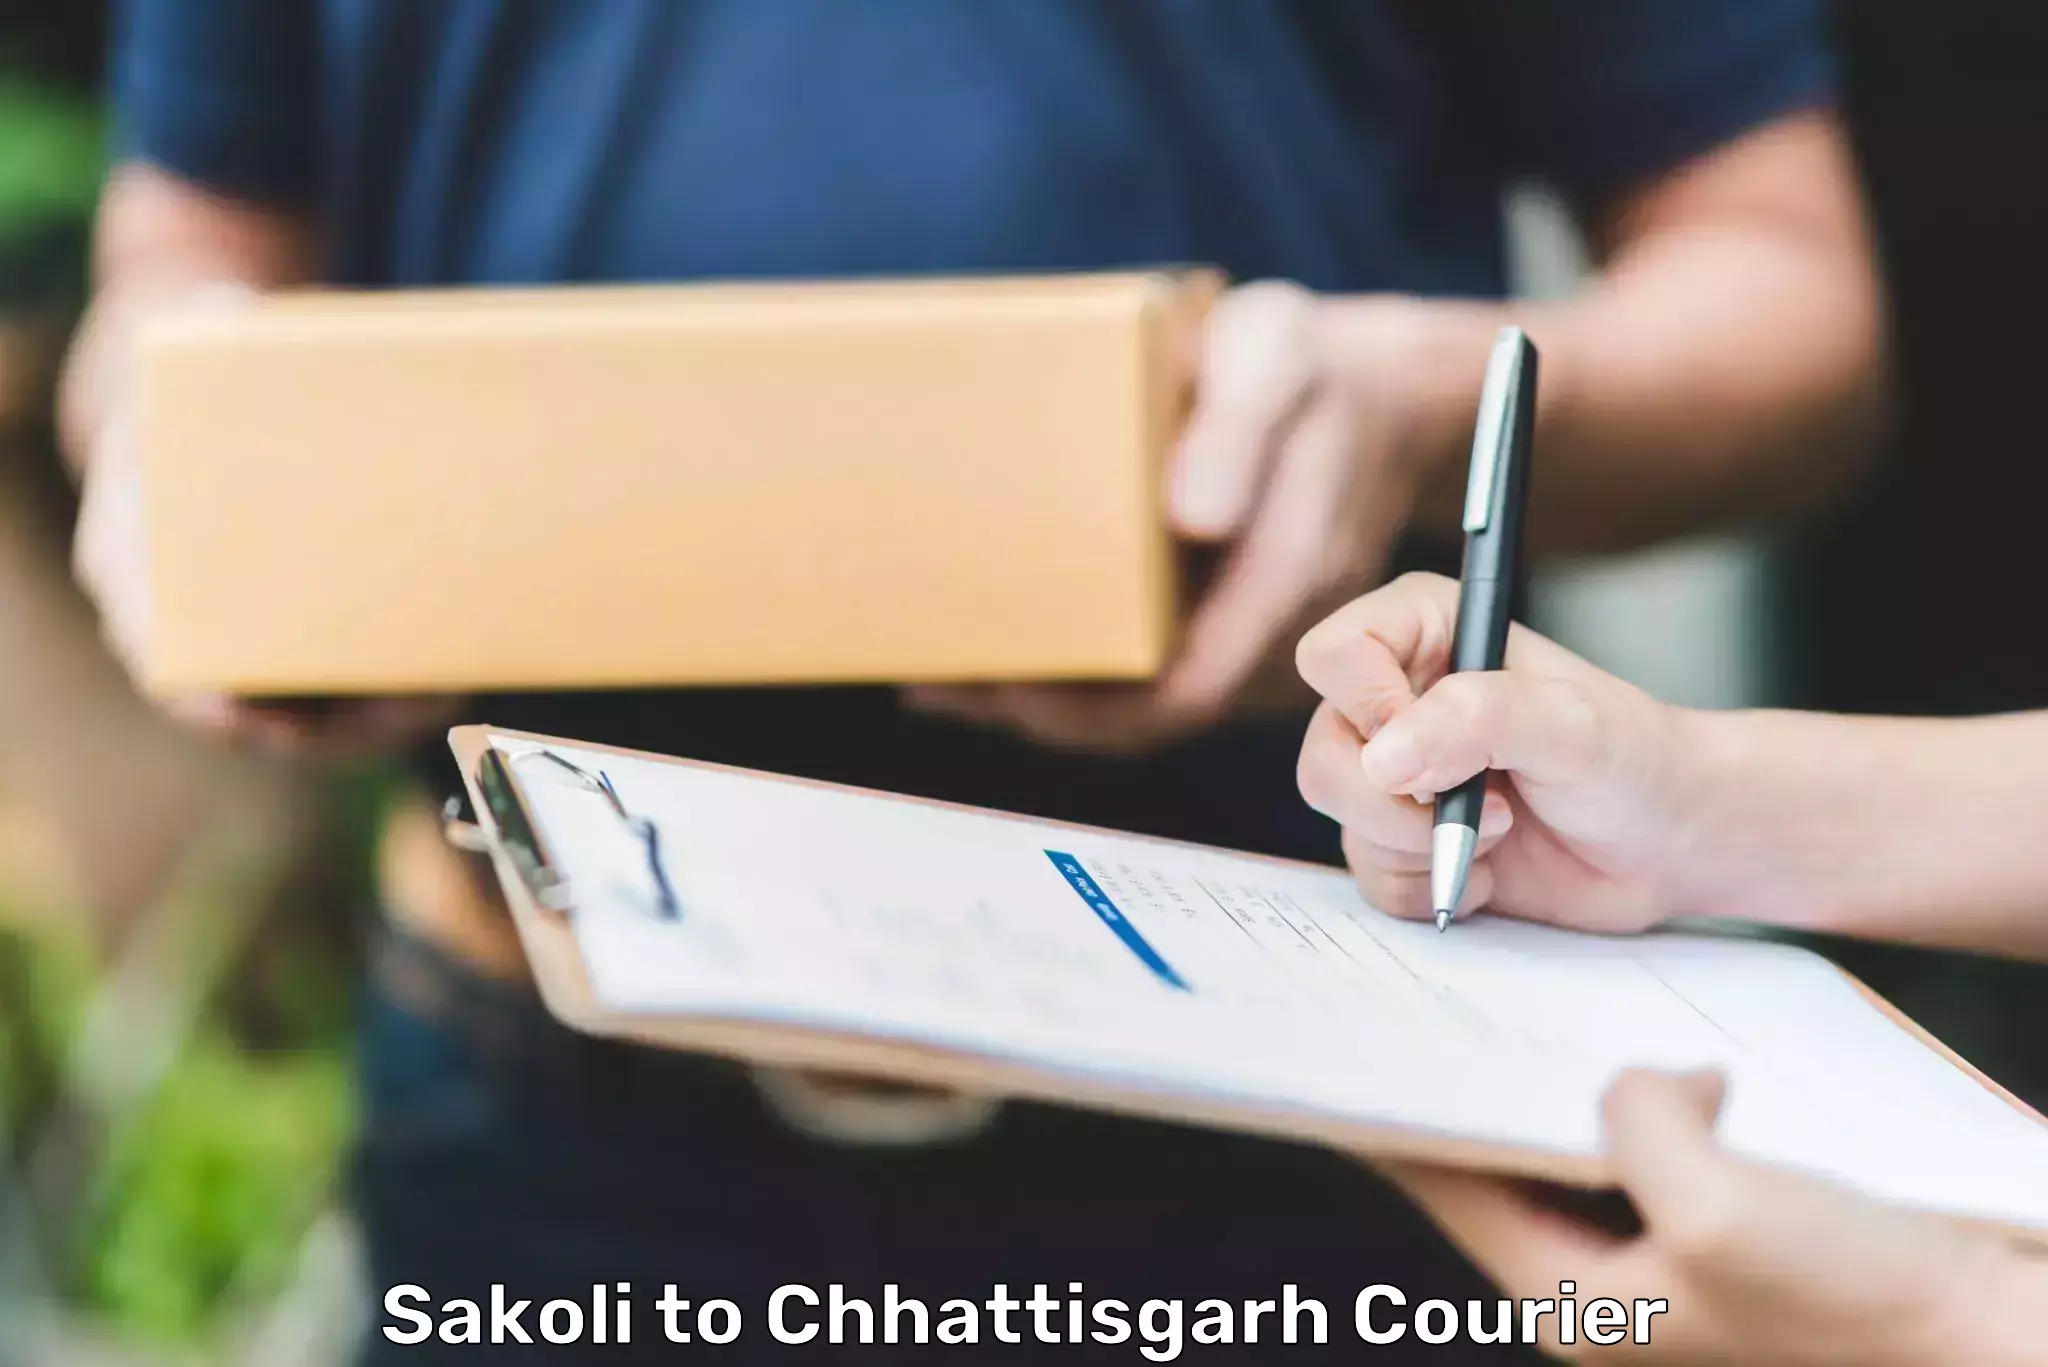 Package delivery network Sakoli to Raigarh